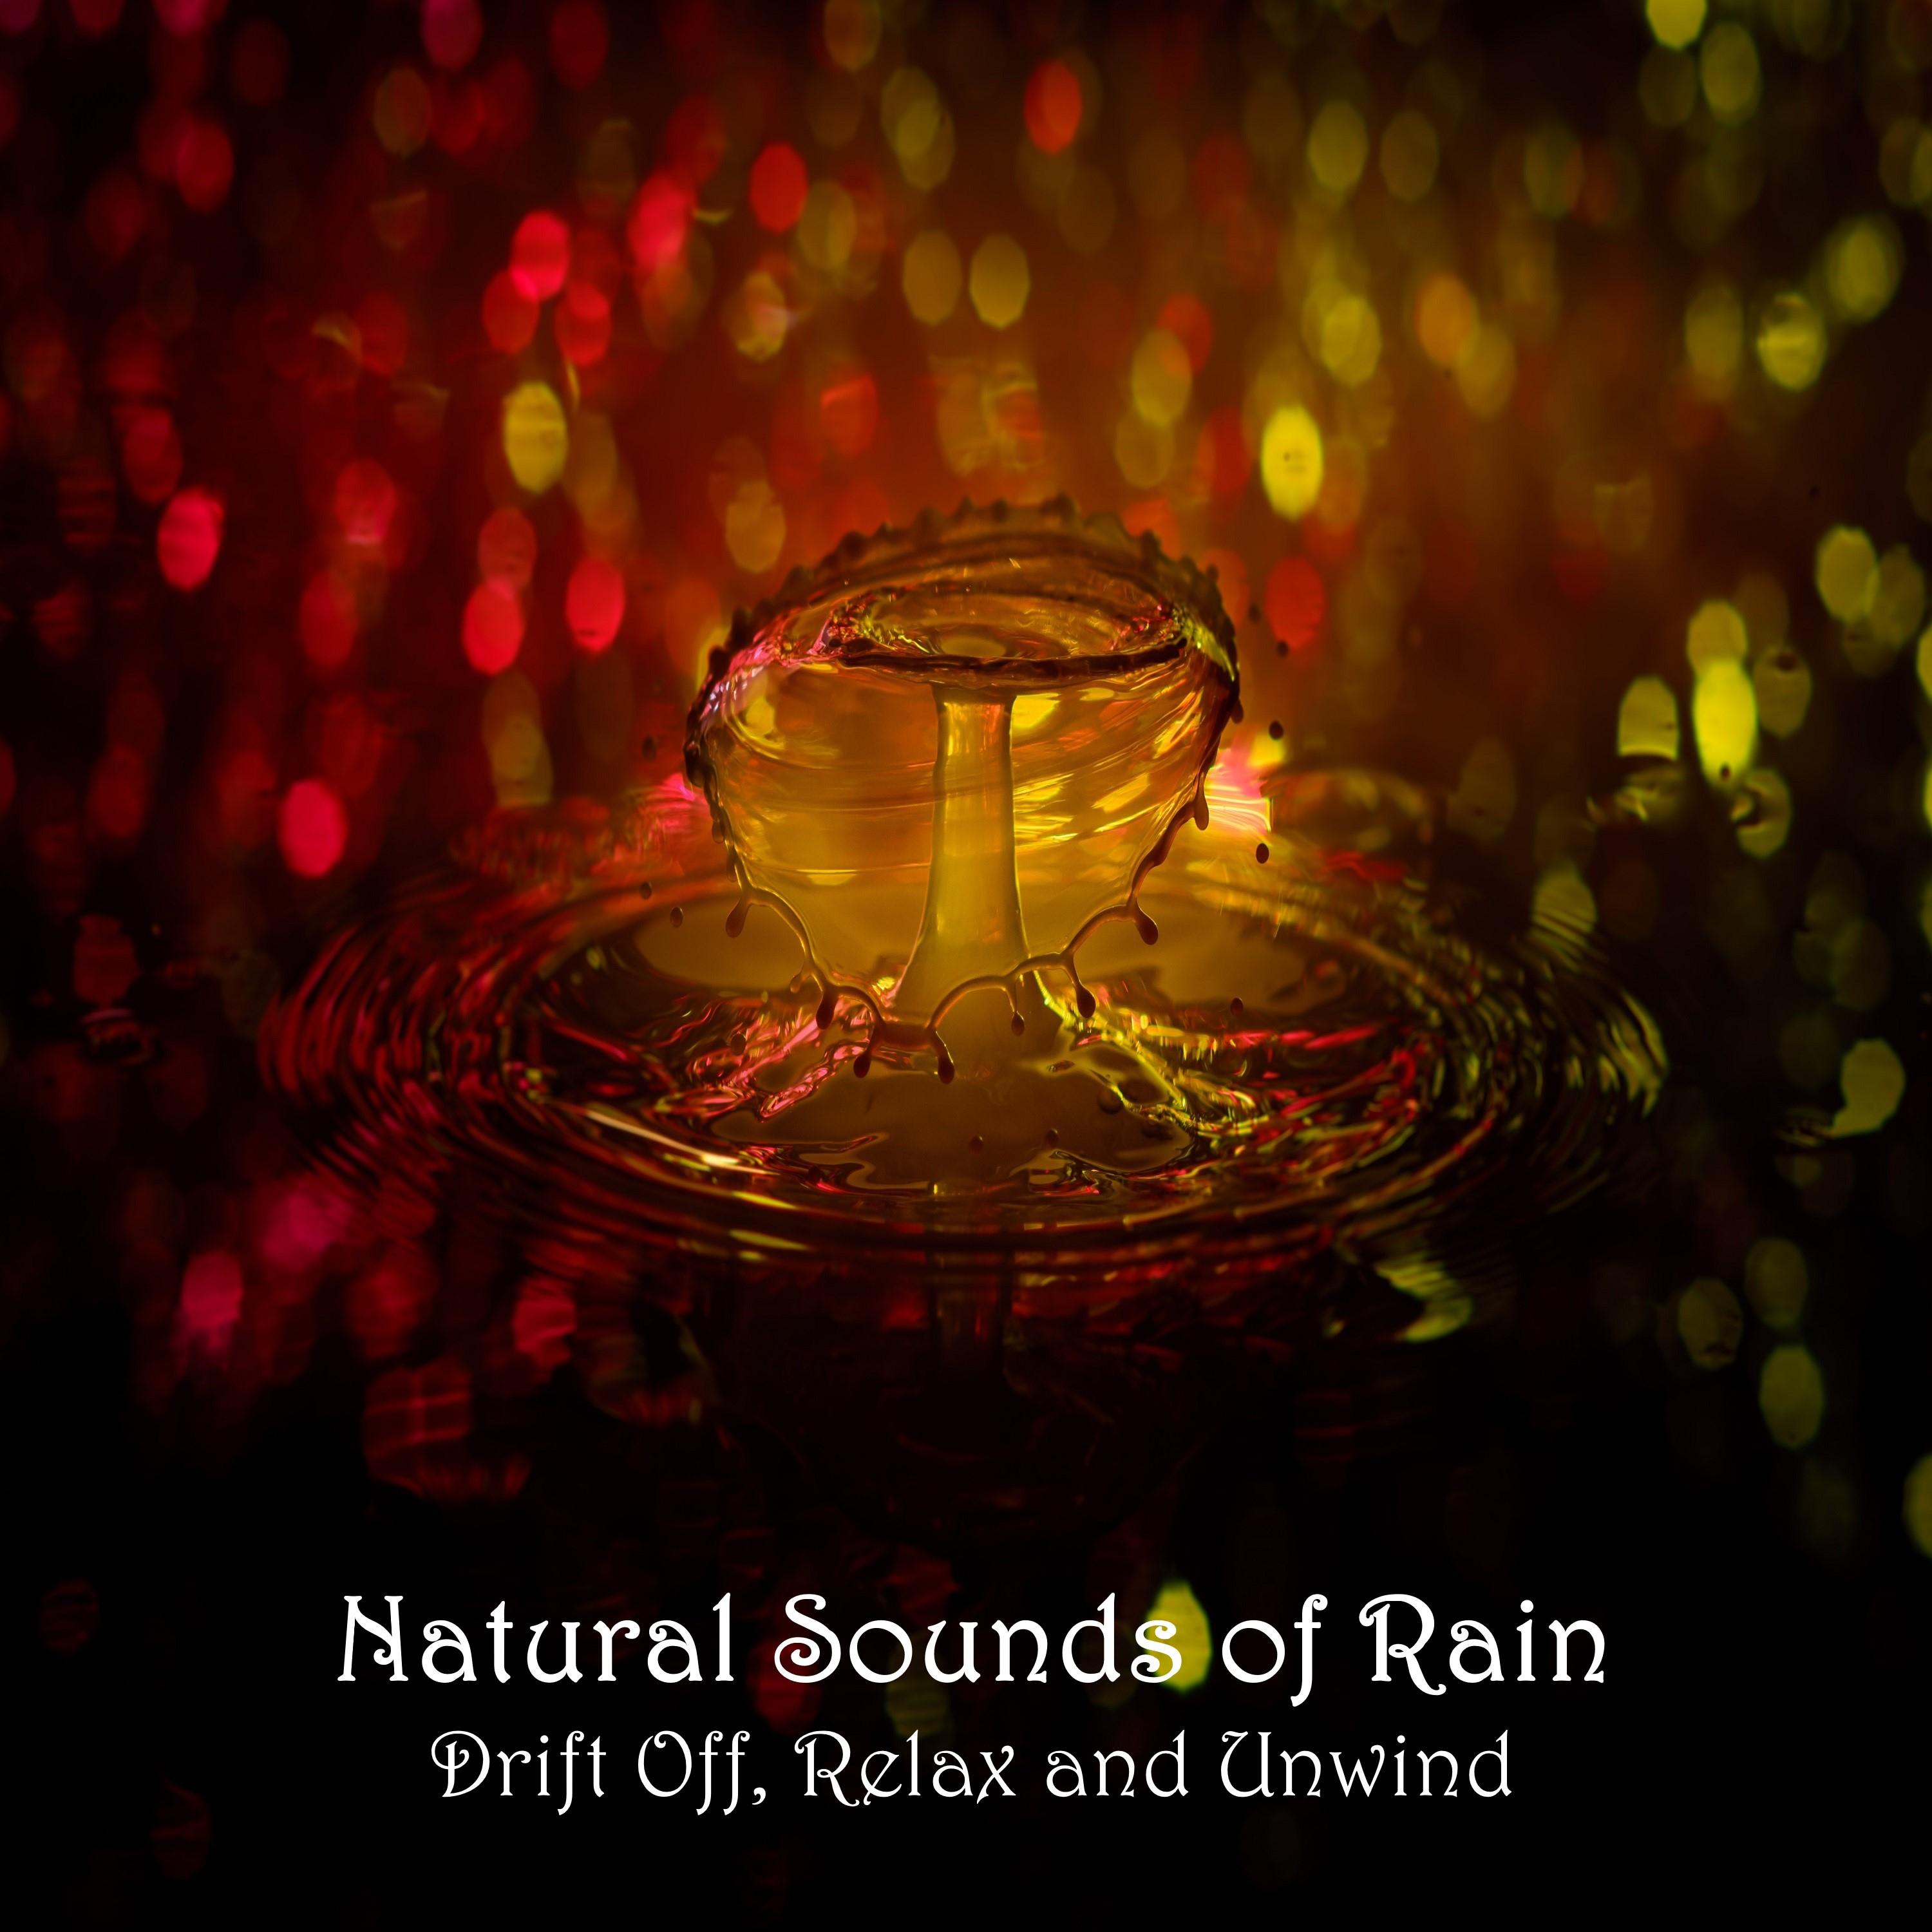 15 Natural Sounds of Rain: Drift Off, Relax and Unwind